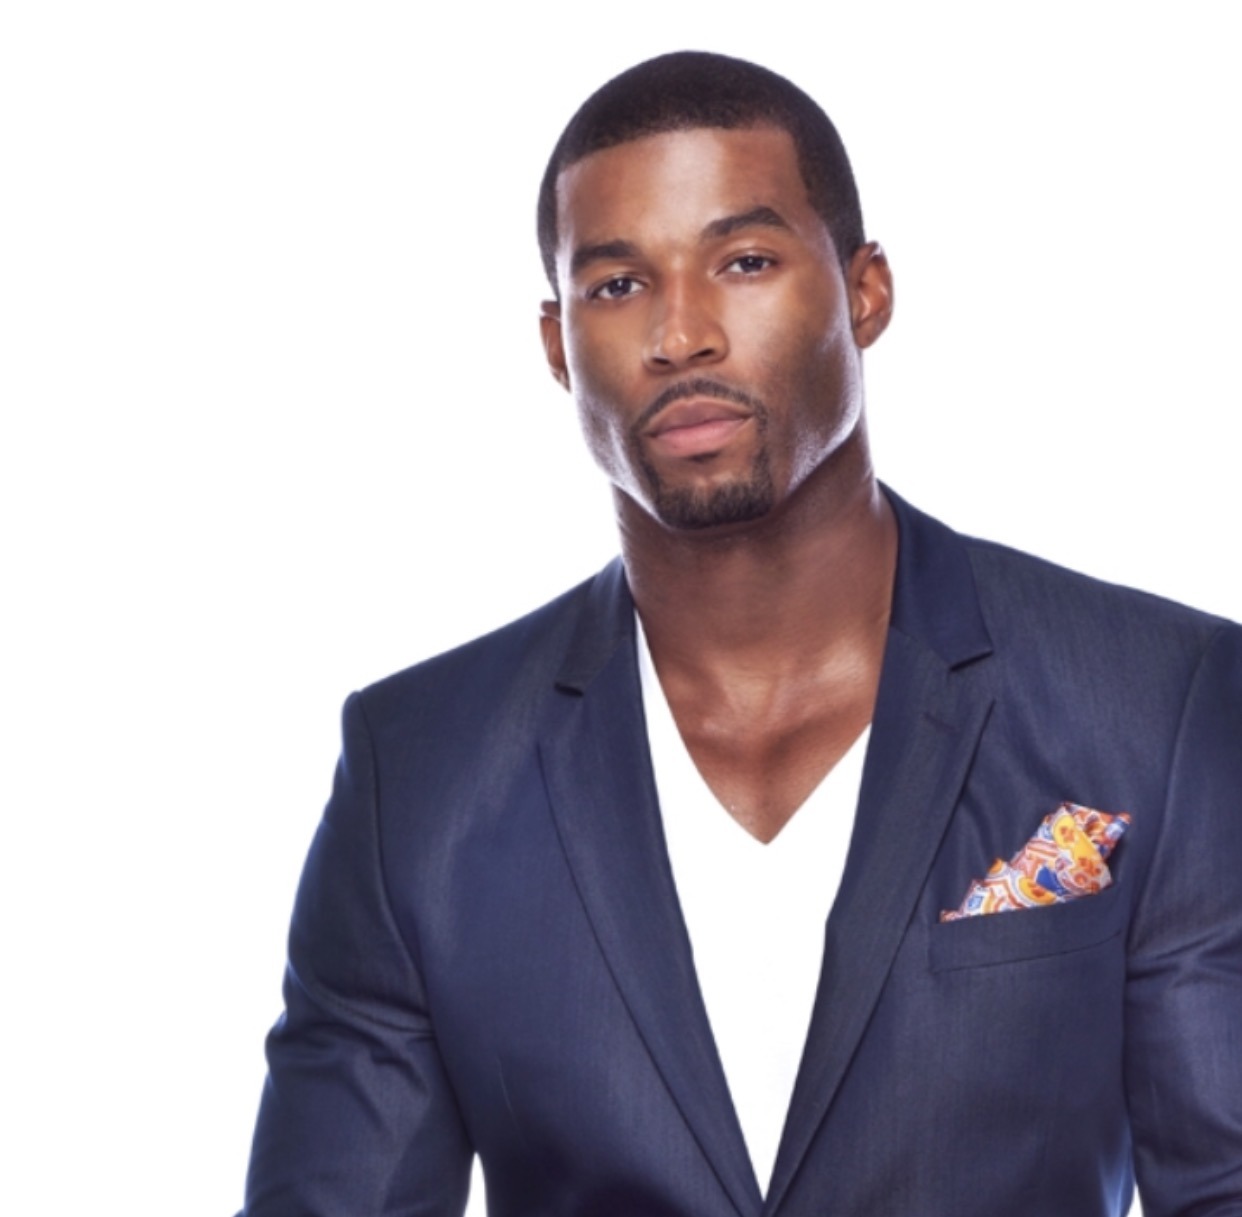 xemsays:  ROBERT CHRISTOPHER RILEY is a 37 year old actor who most will recognize